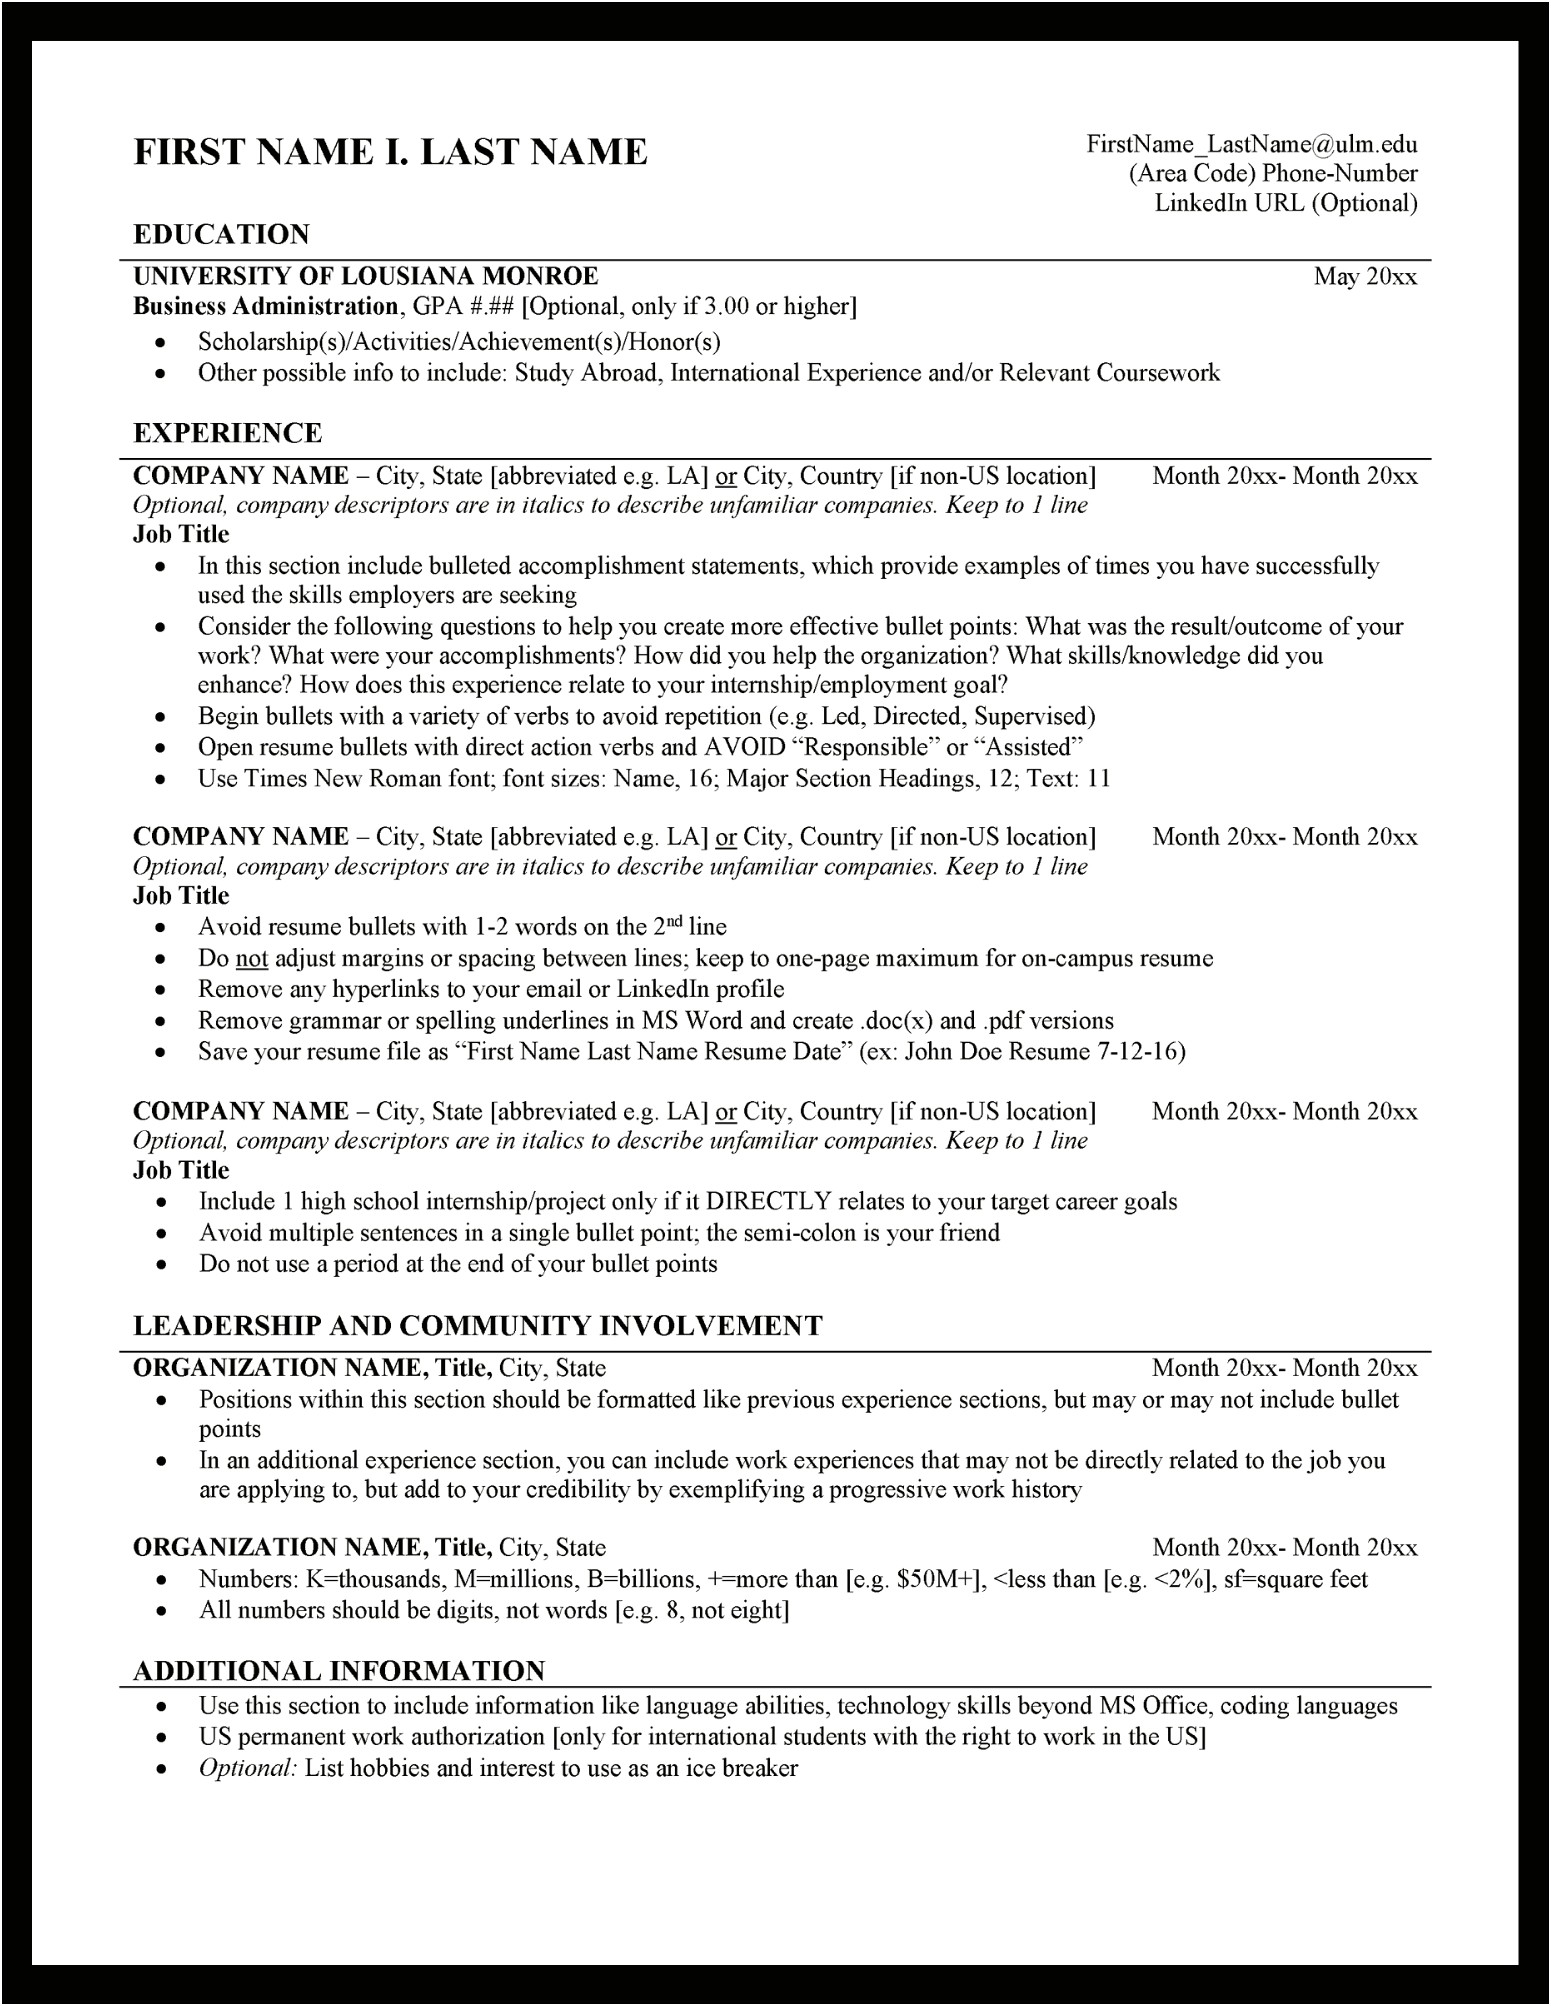 Area Of Study To Put On A Resume